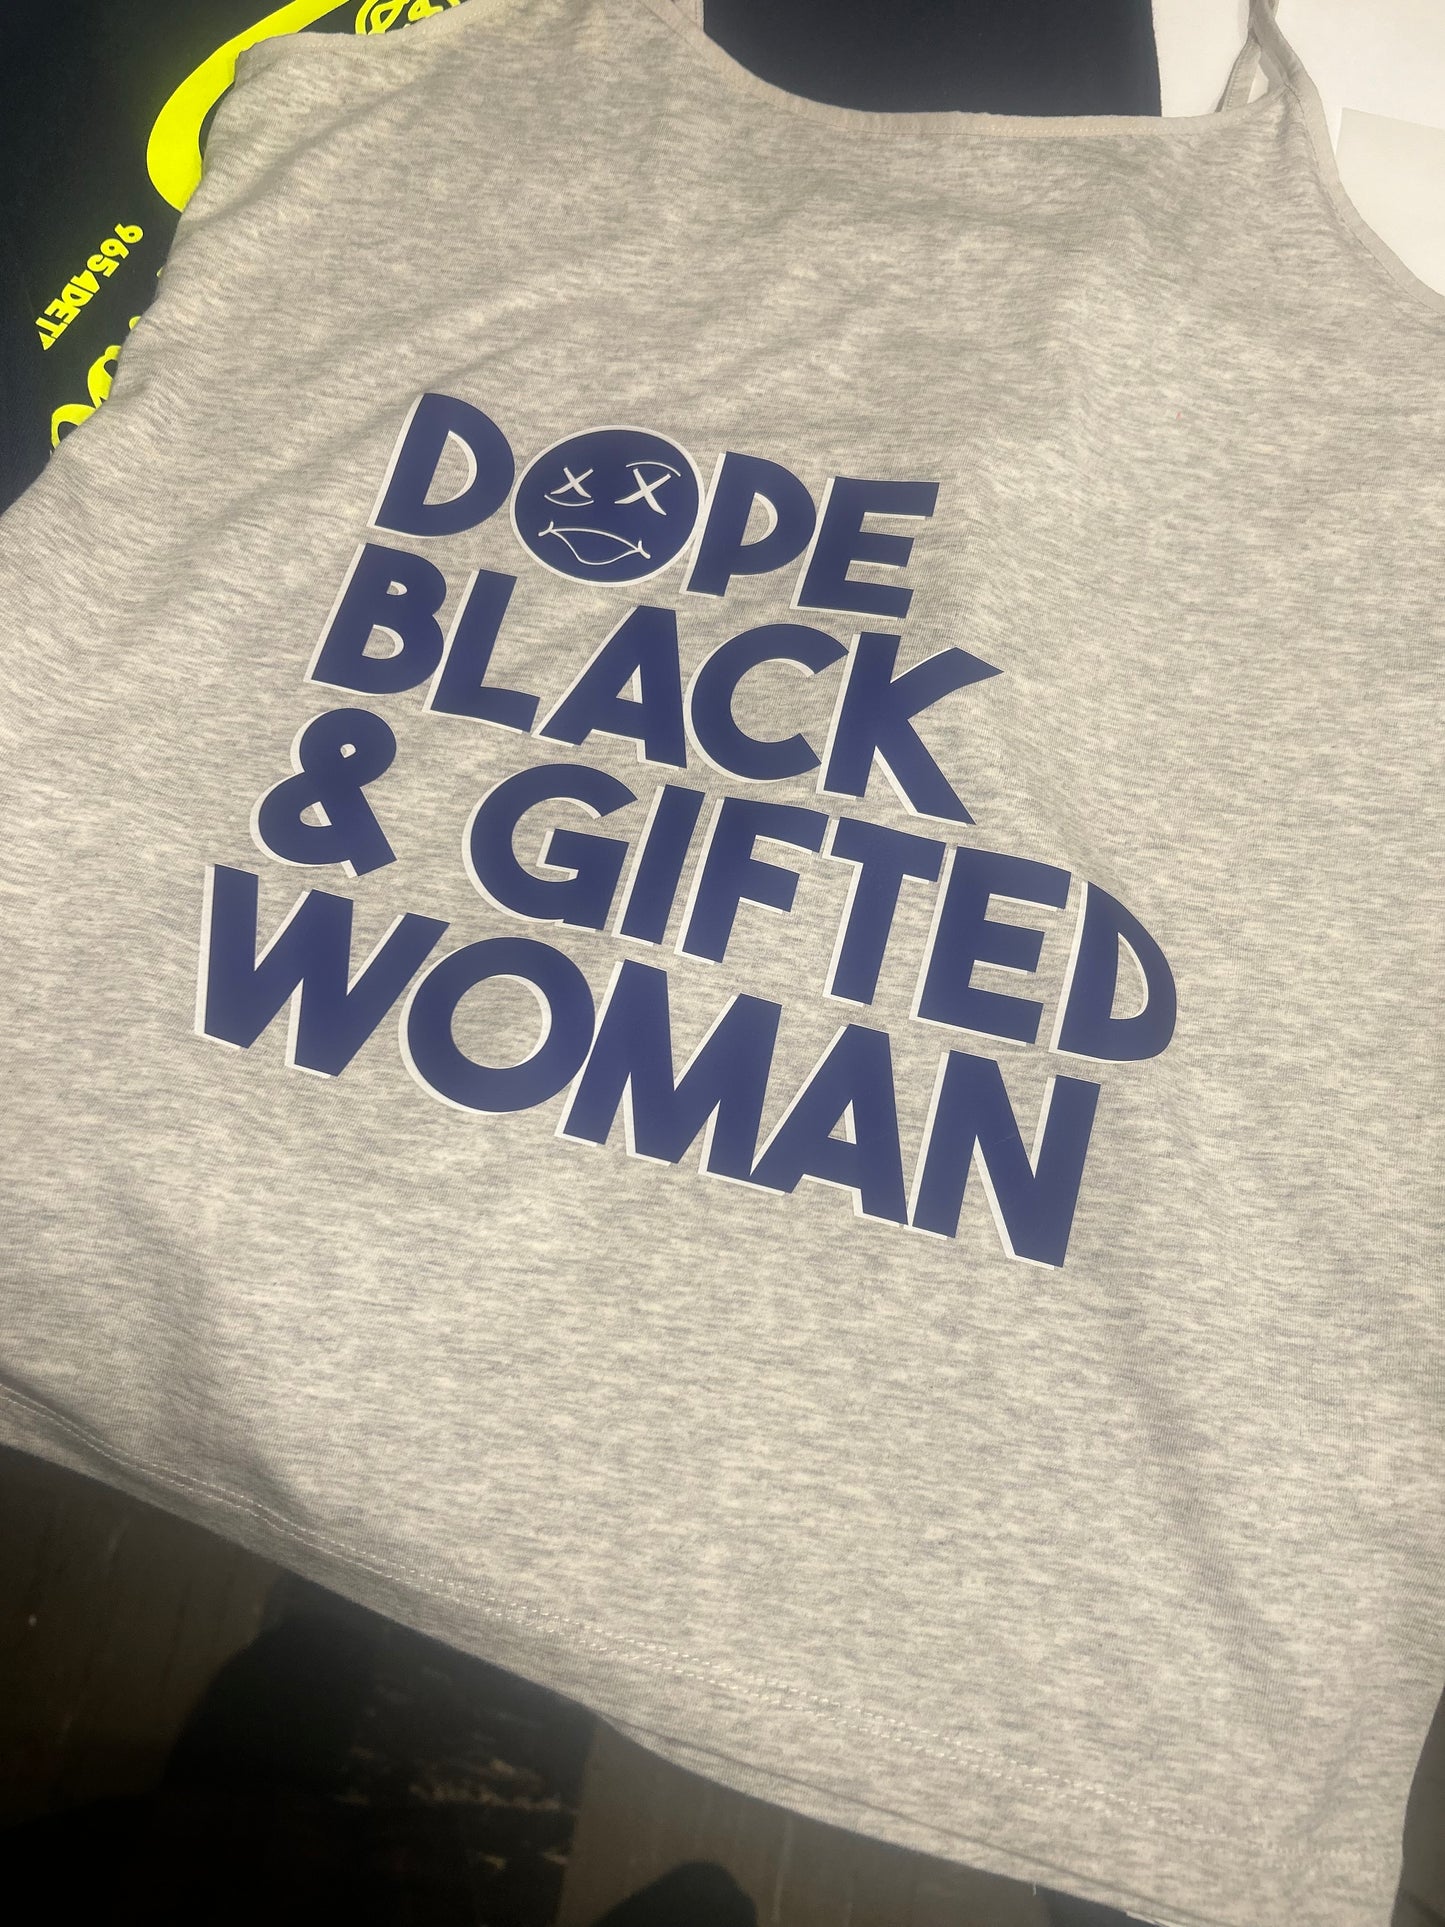 Dope Black & Gifted Woman